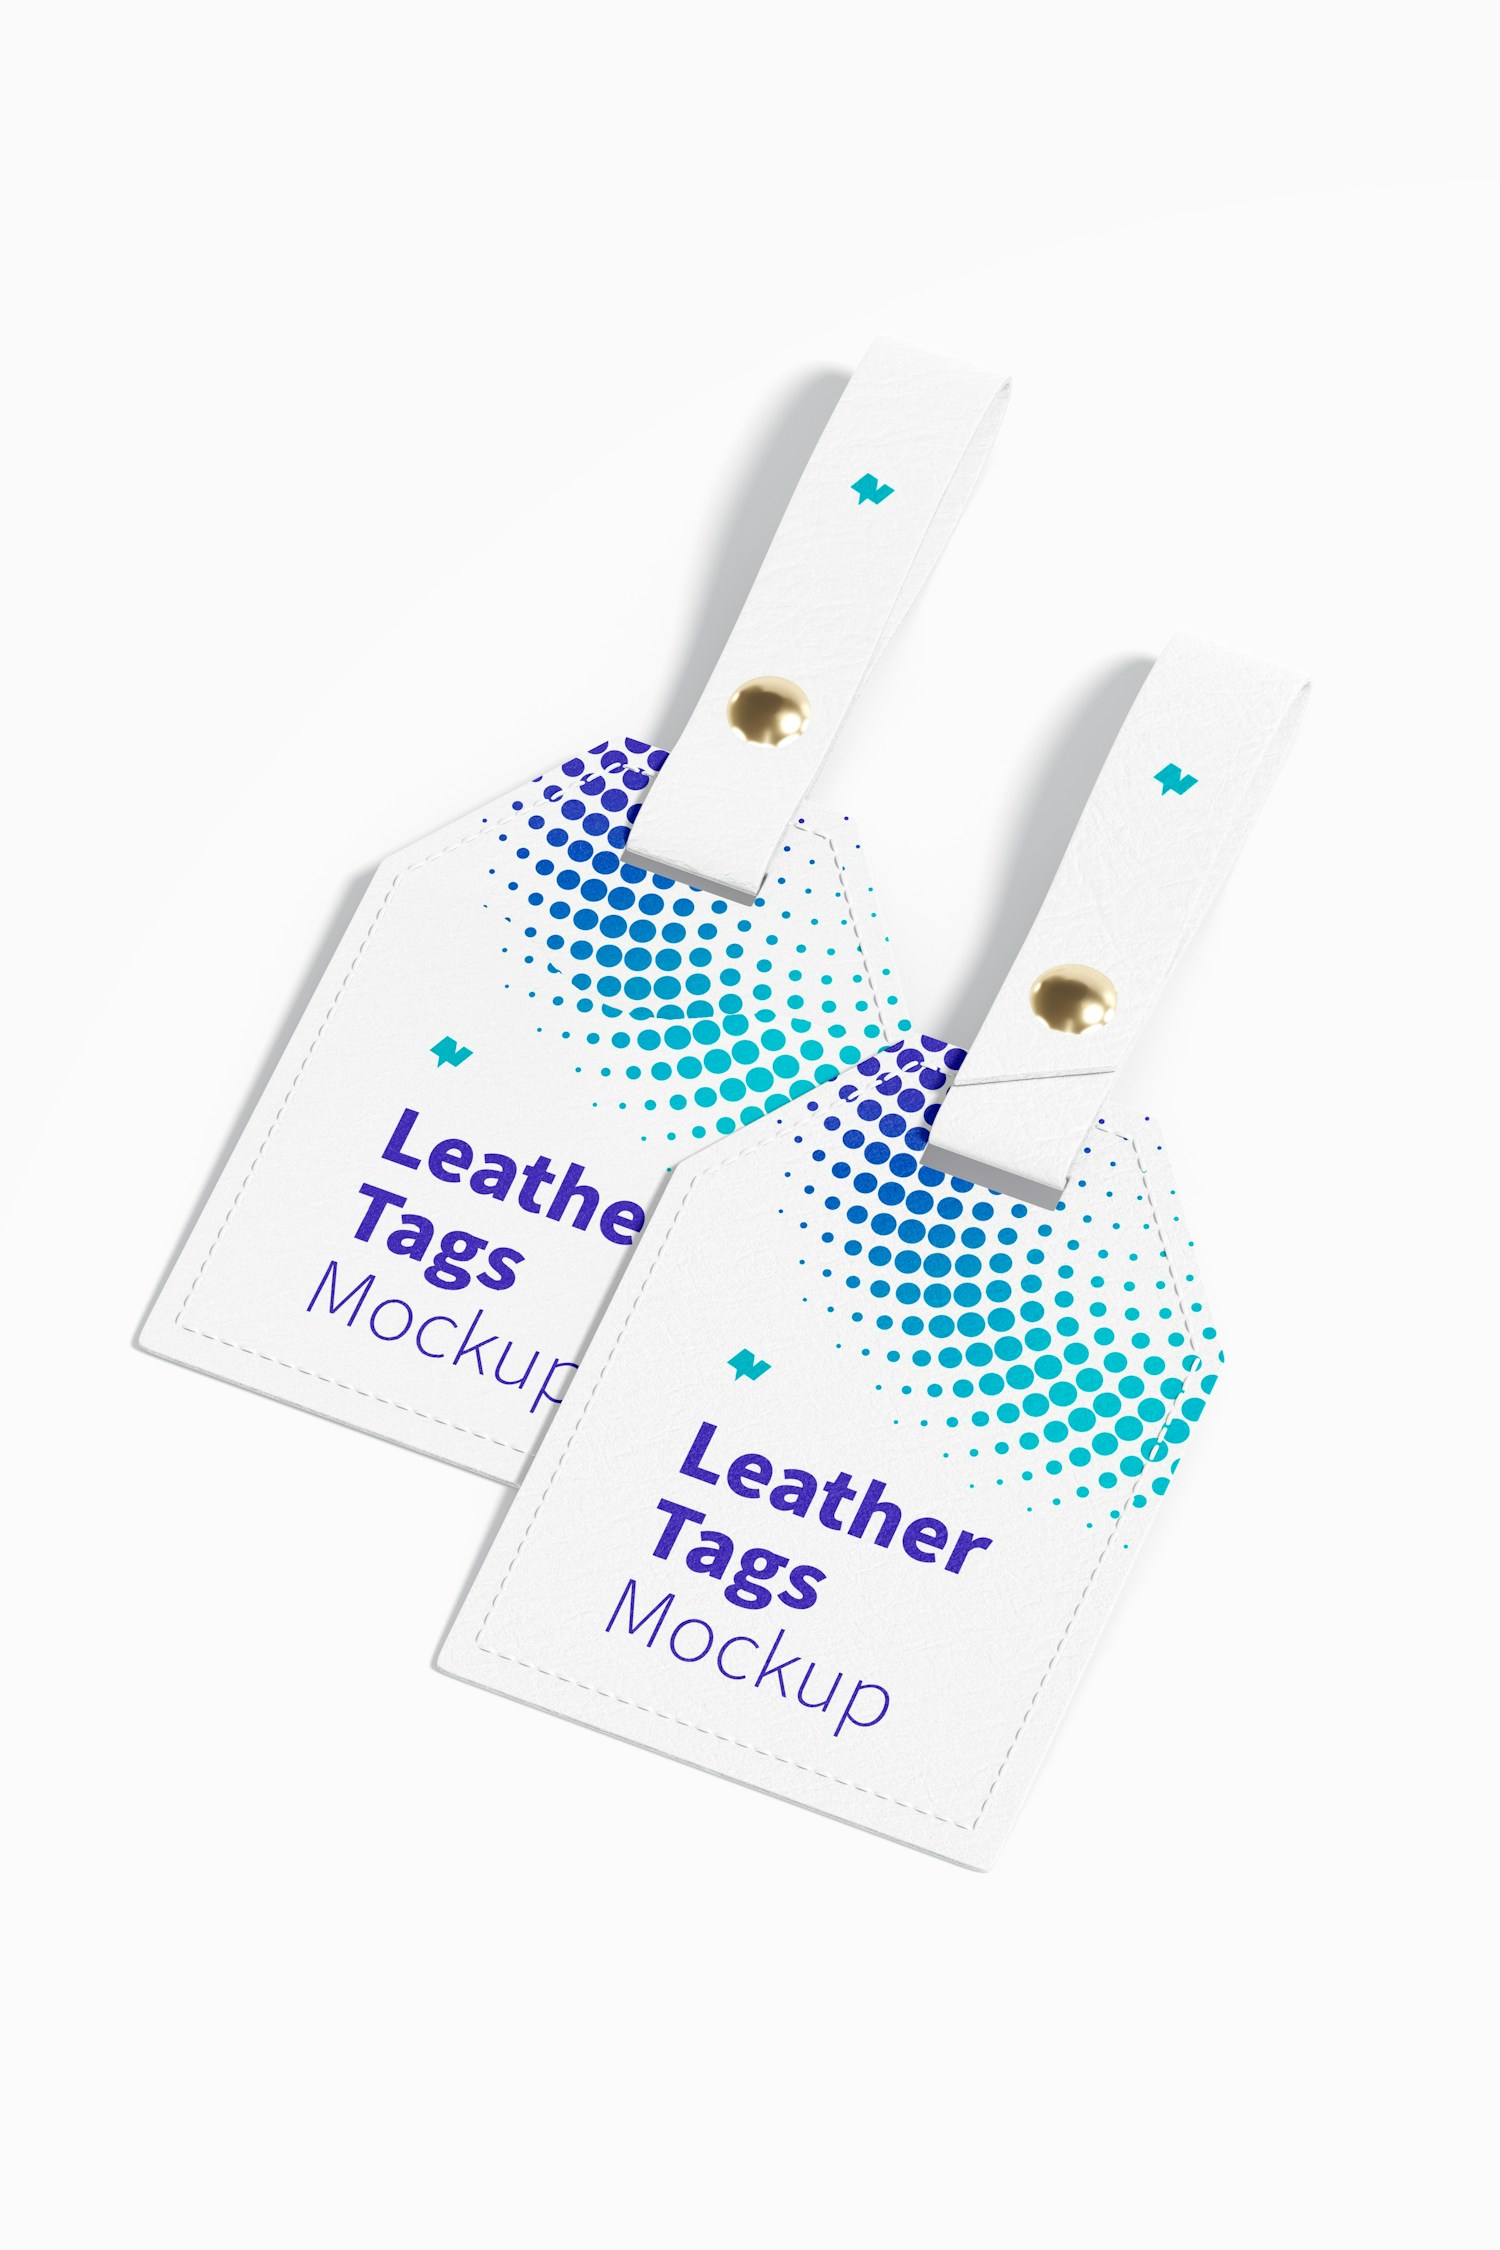 Leather Tags Mockup, Top View